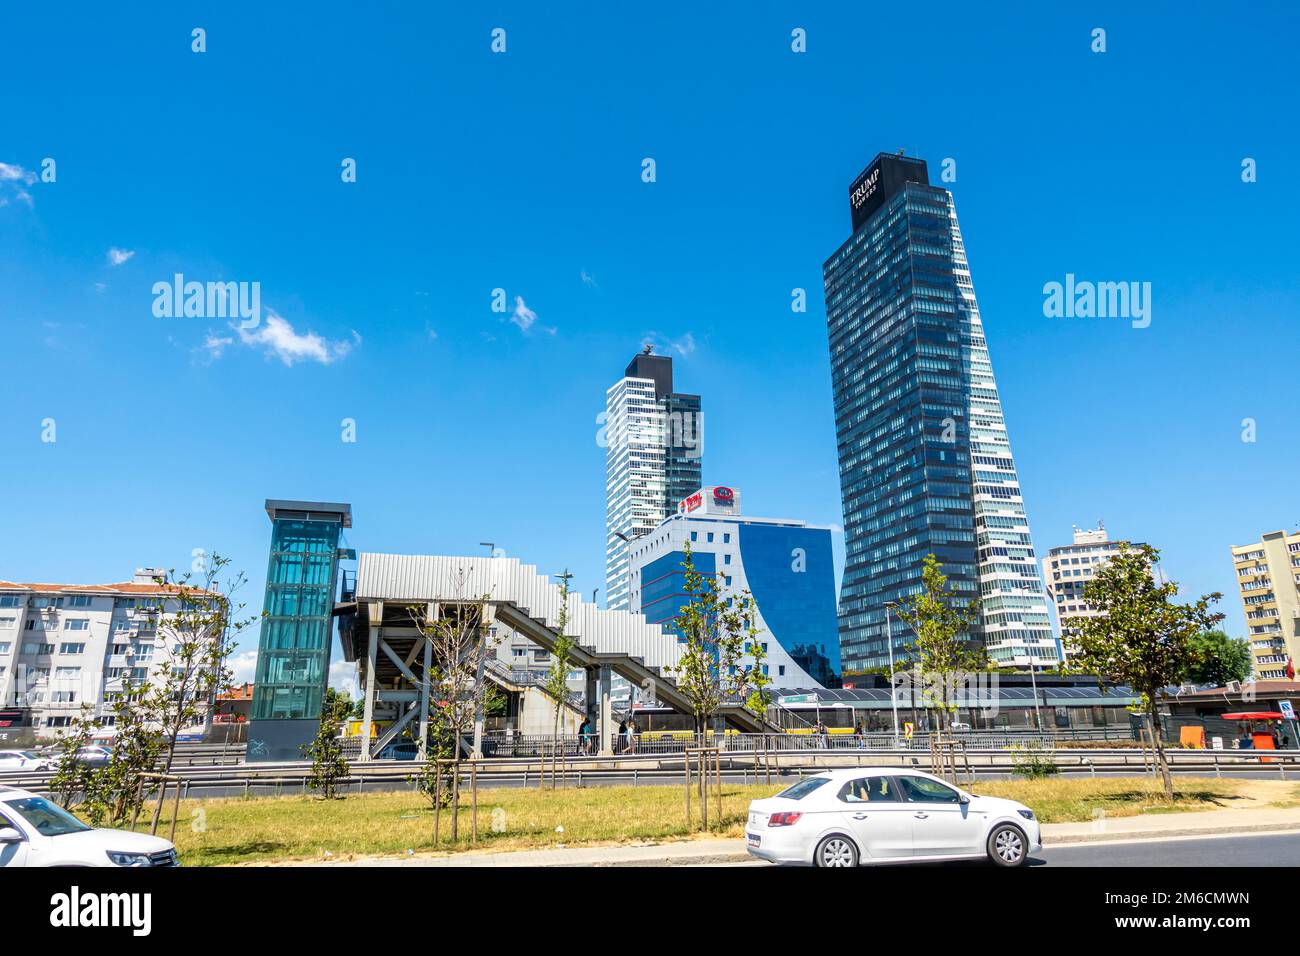 Trump Towers scyscrapers seen behind a bus station in Istanbul, Turkey. High-rise buildings of Istanbul Stock Photo